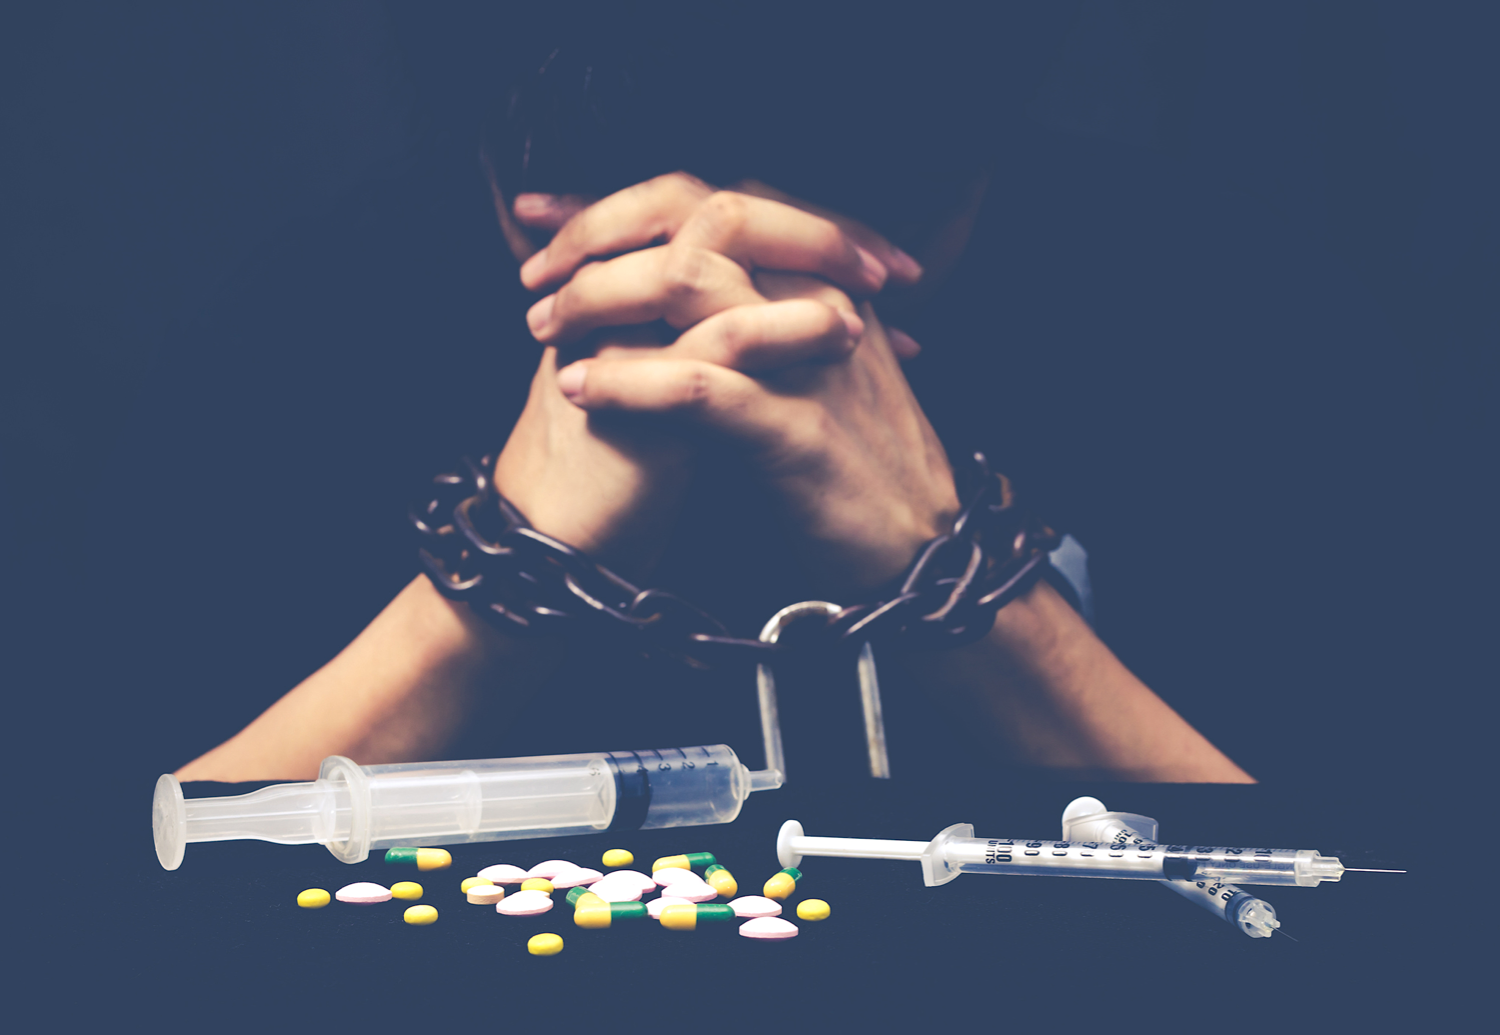 Can The Use Of Opiates Cause Addiction?